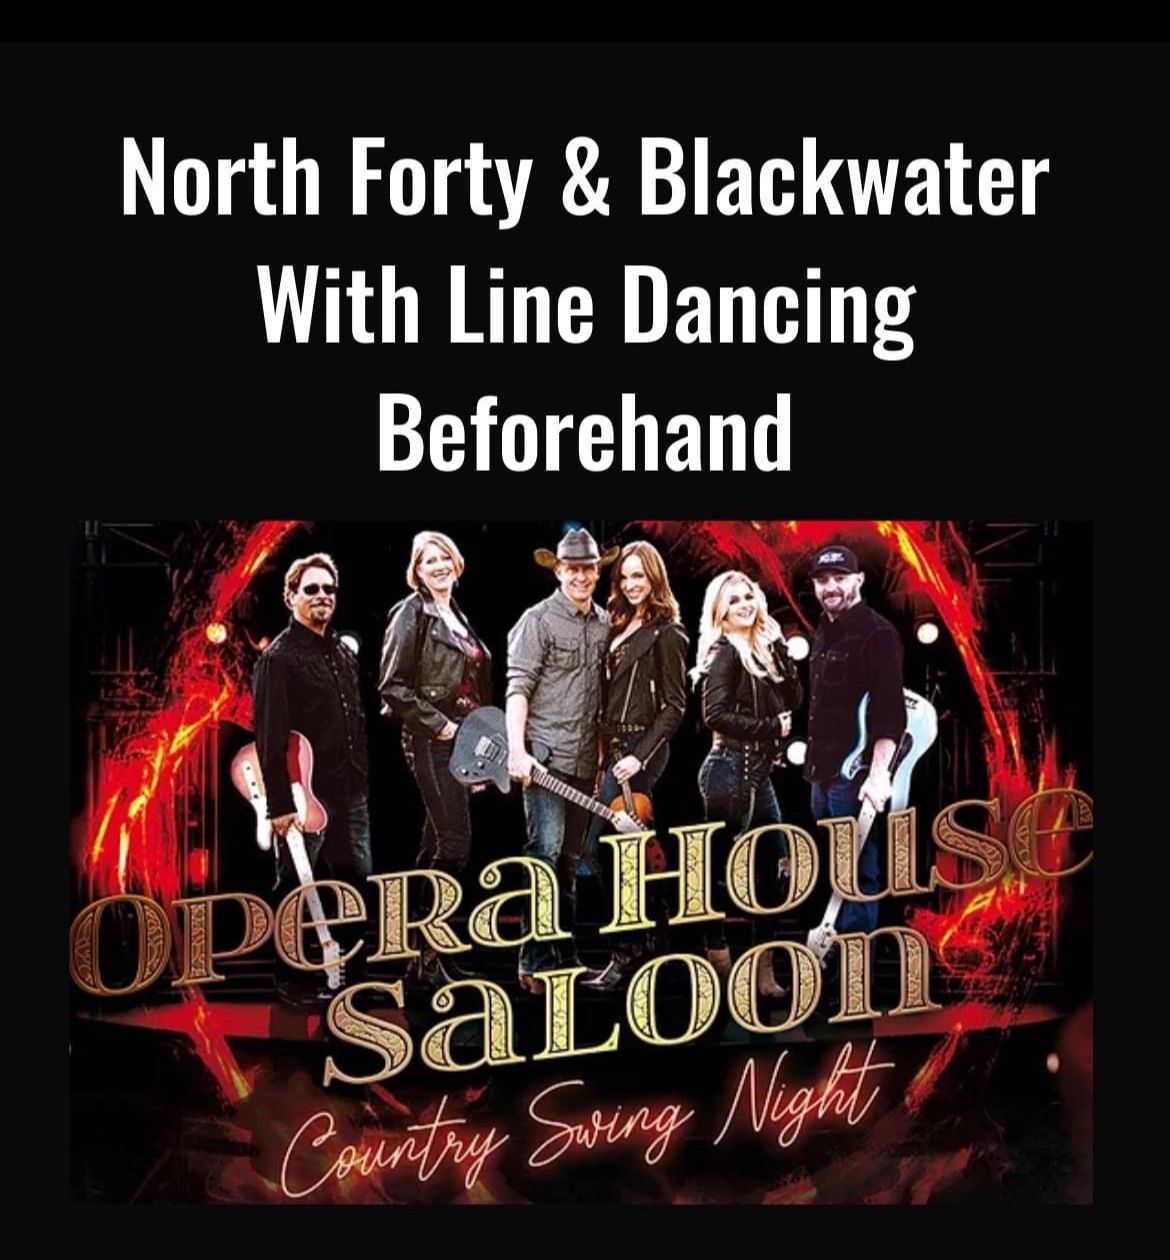 LiNe DaNcInG with Jen Michele + North Forty & Blackwater!!